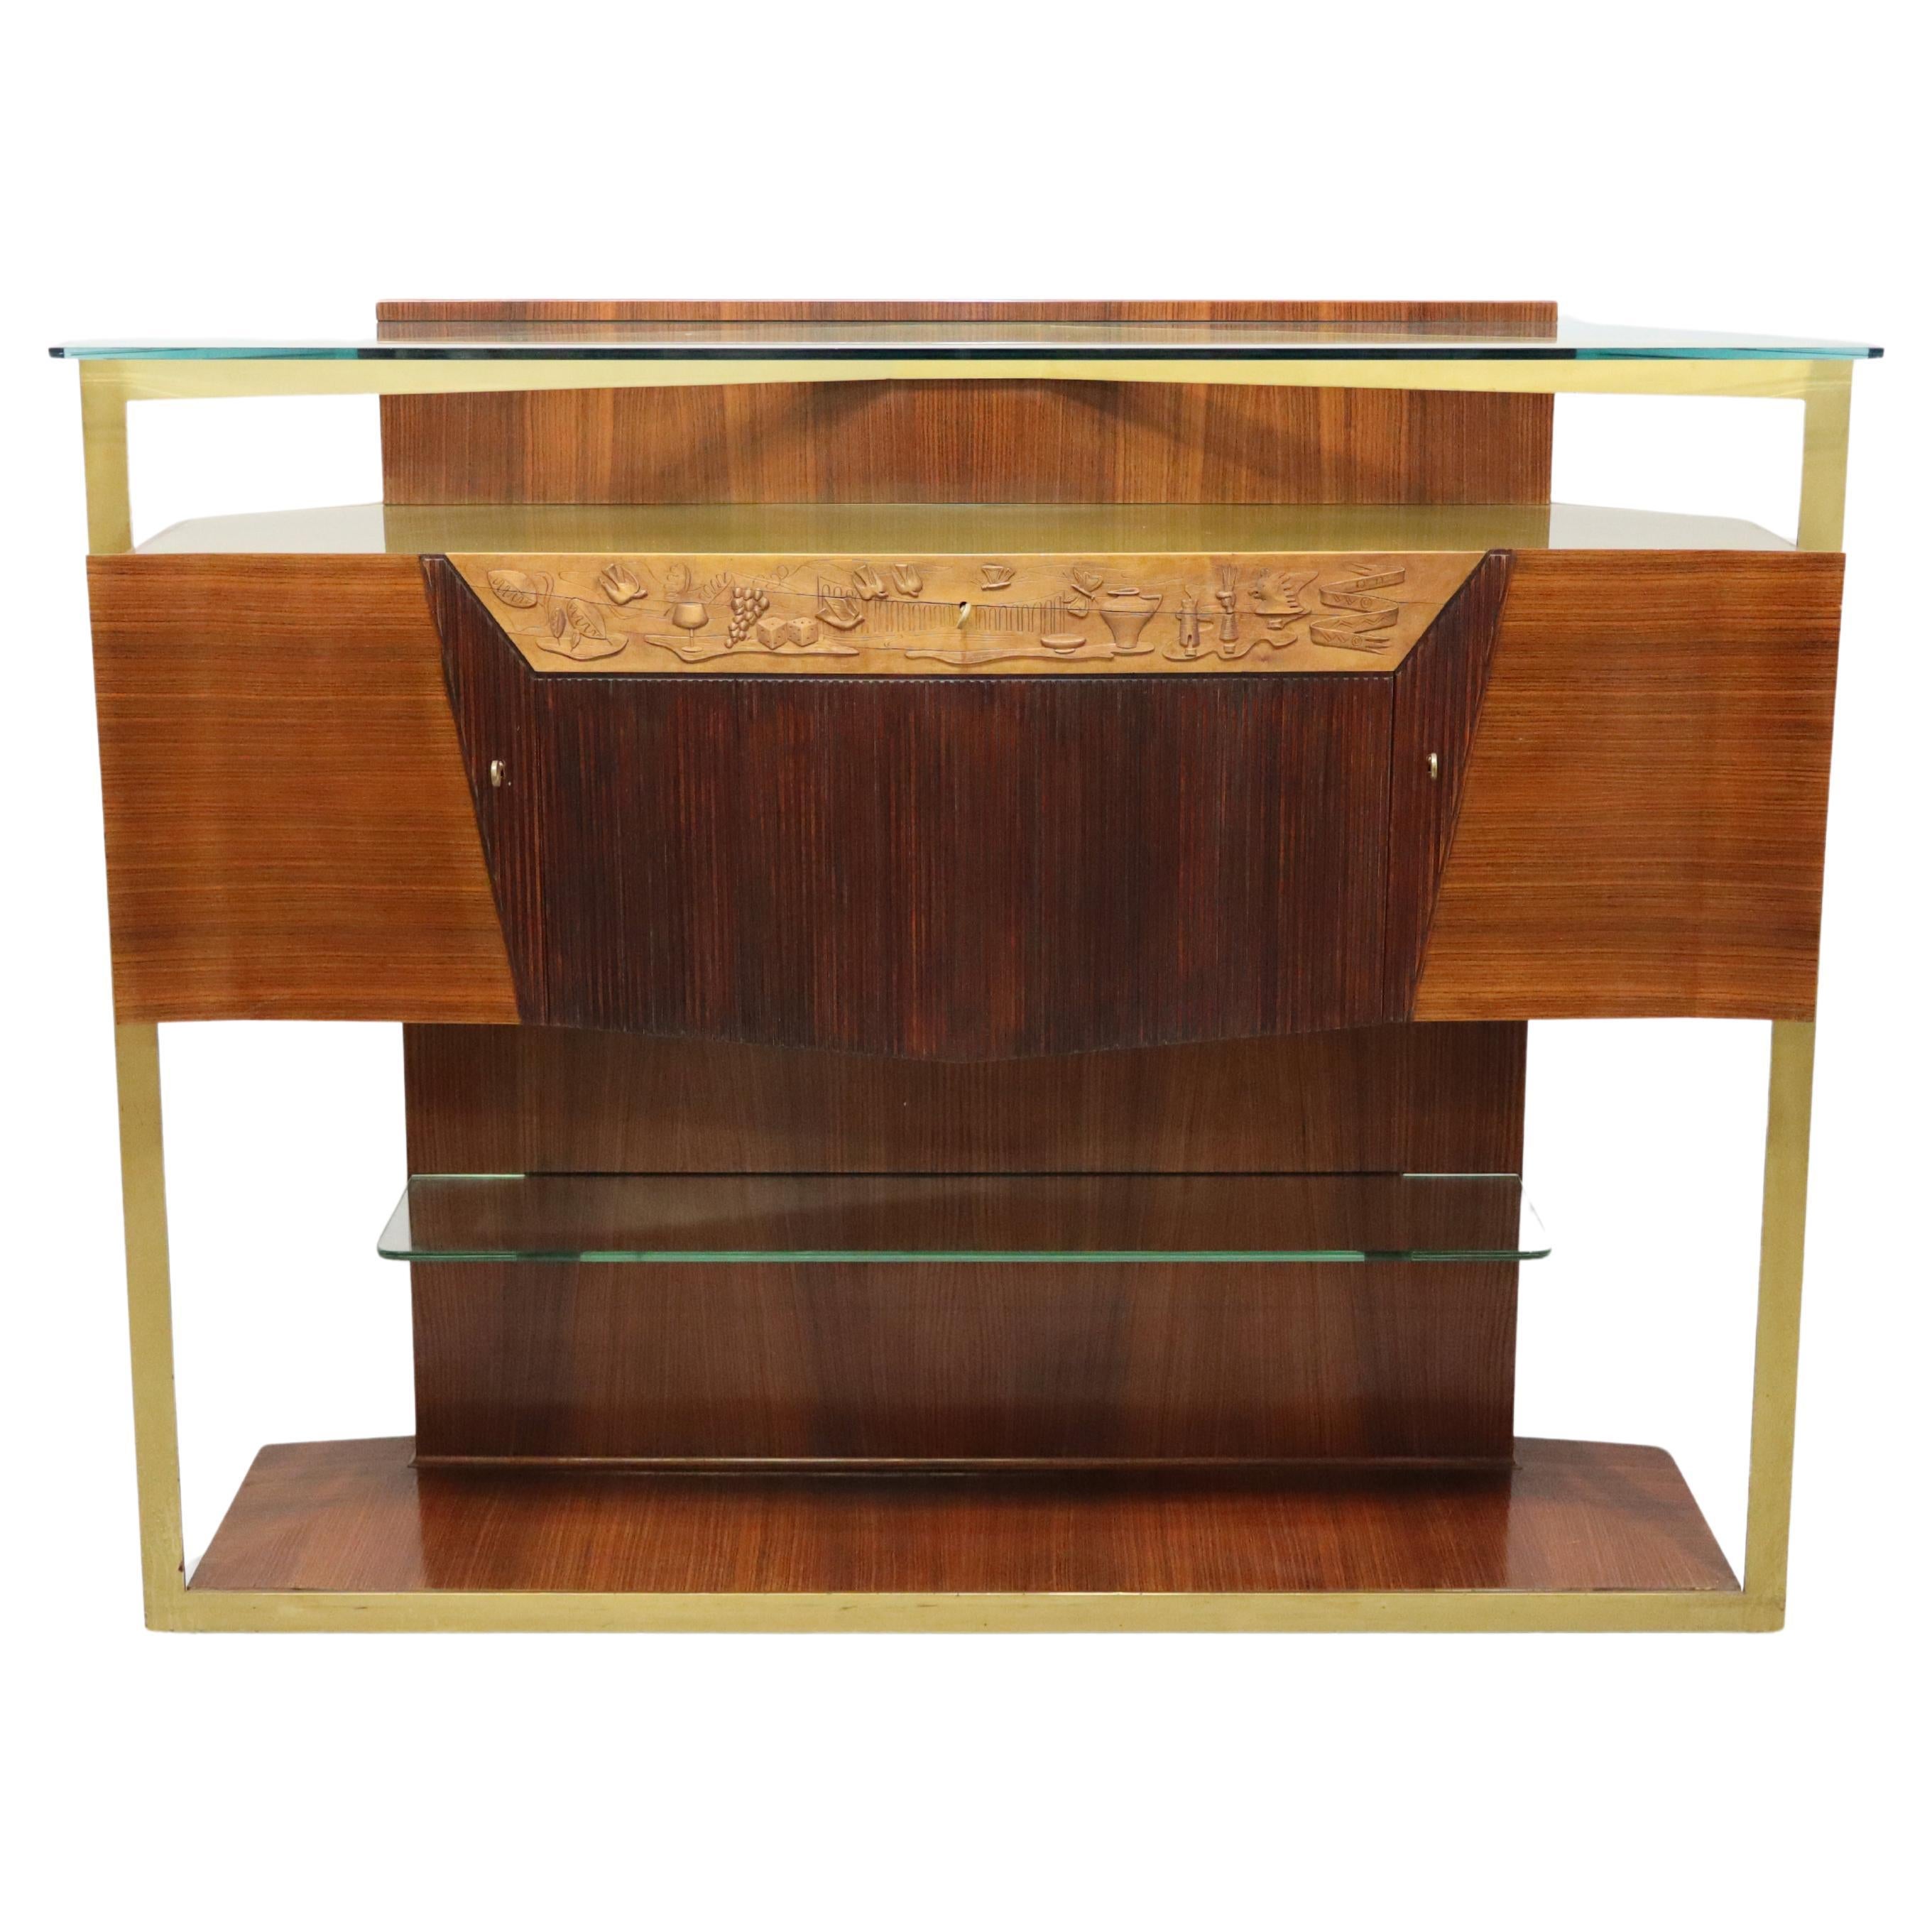 Italian Midcentury Rosewood Sideboard or Bar Cabinet by Vittorio Dassi, 1950s For Sale